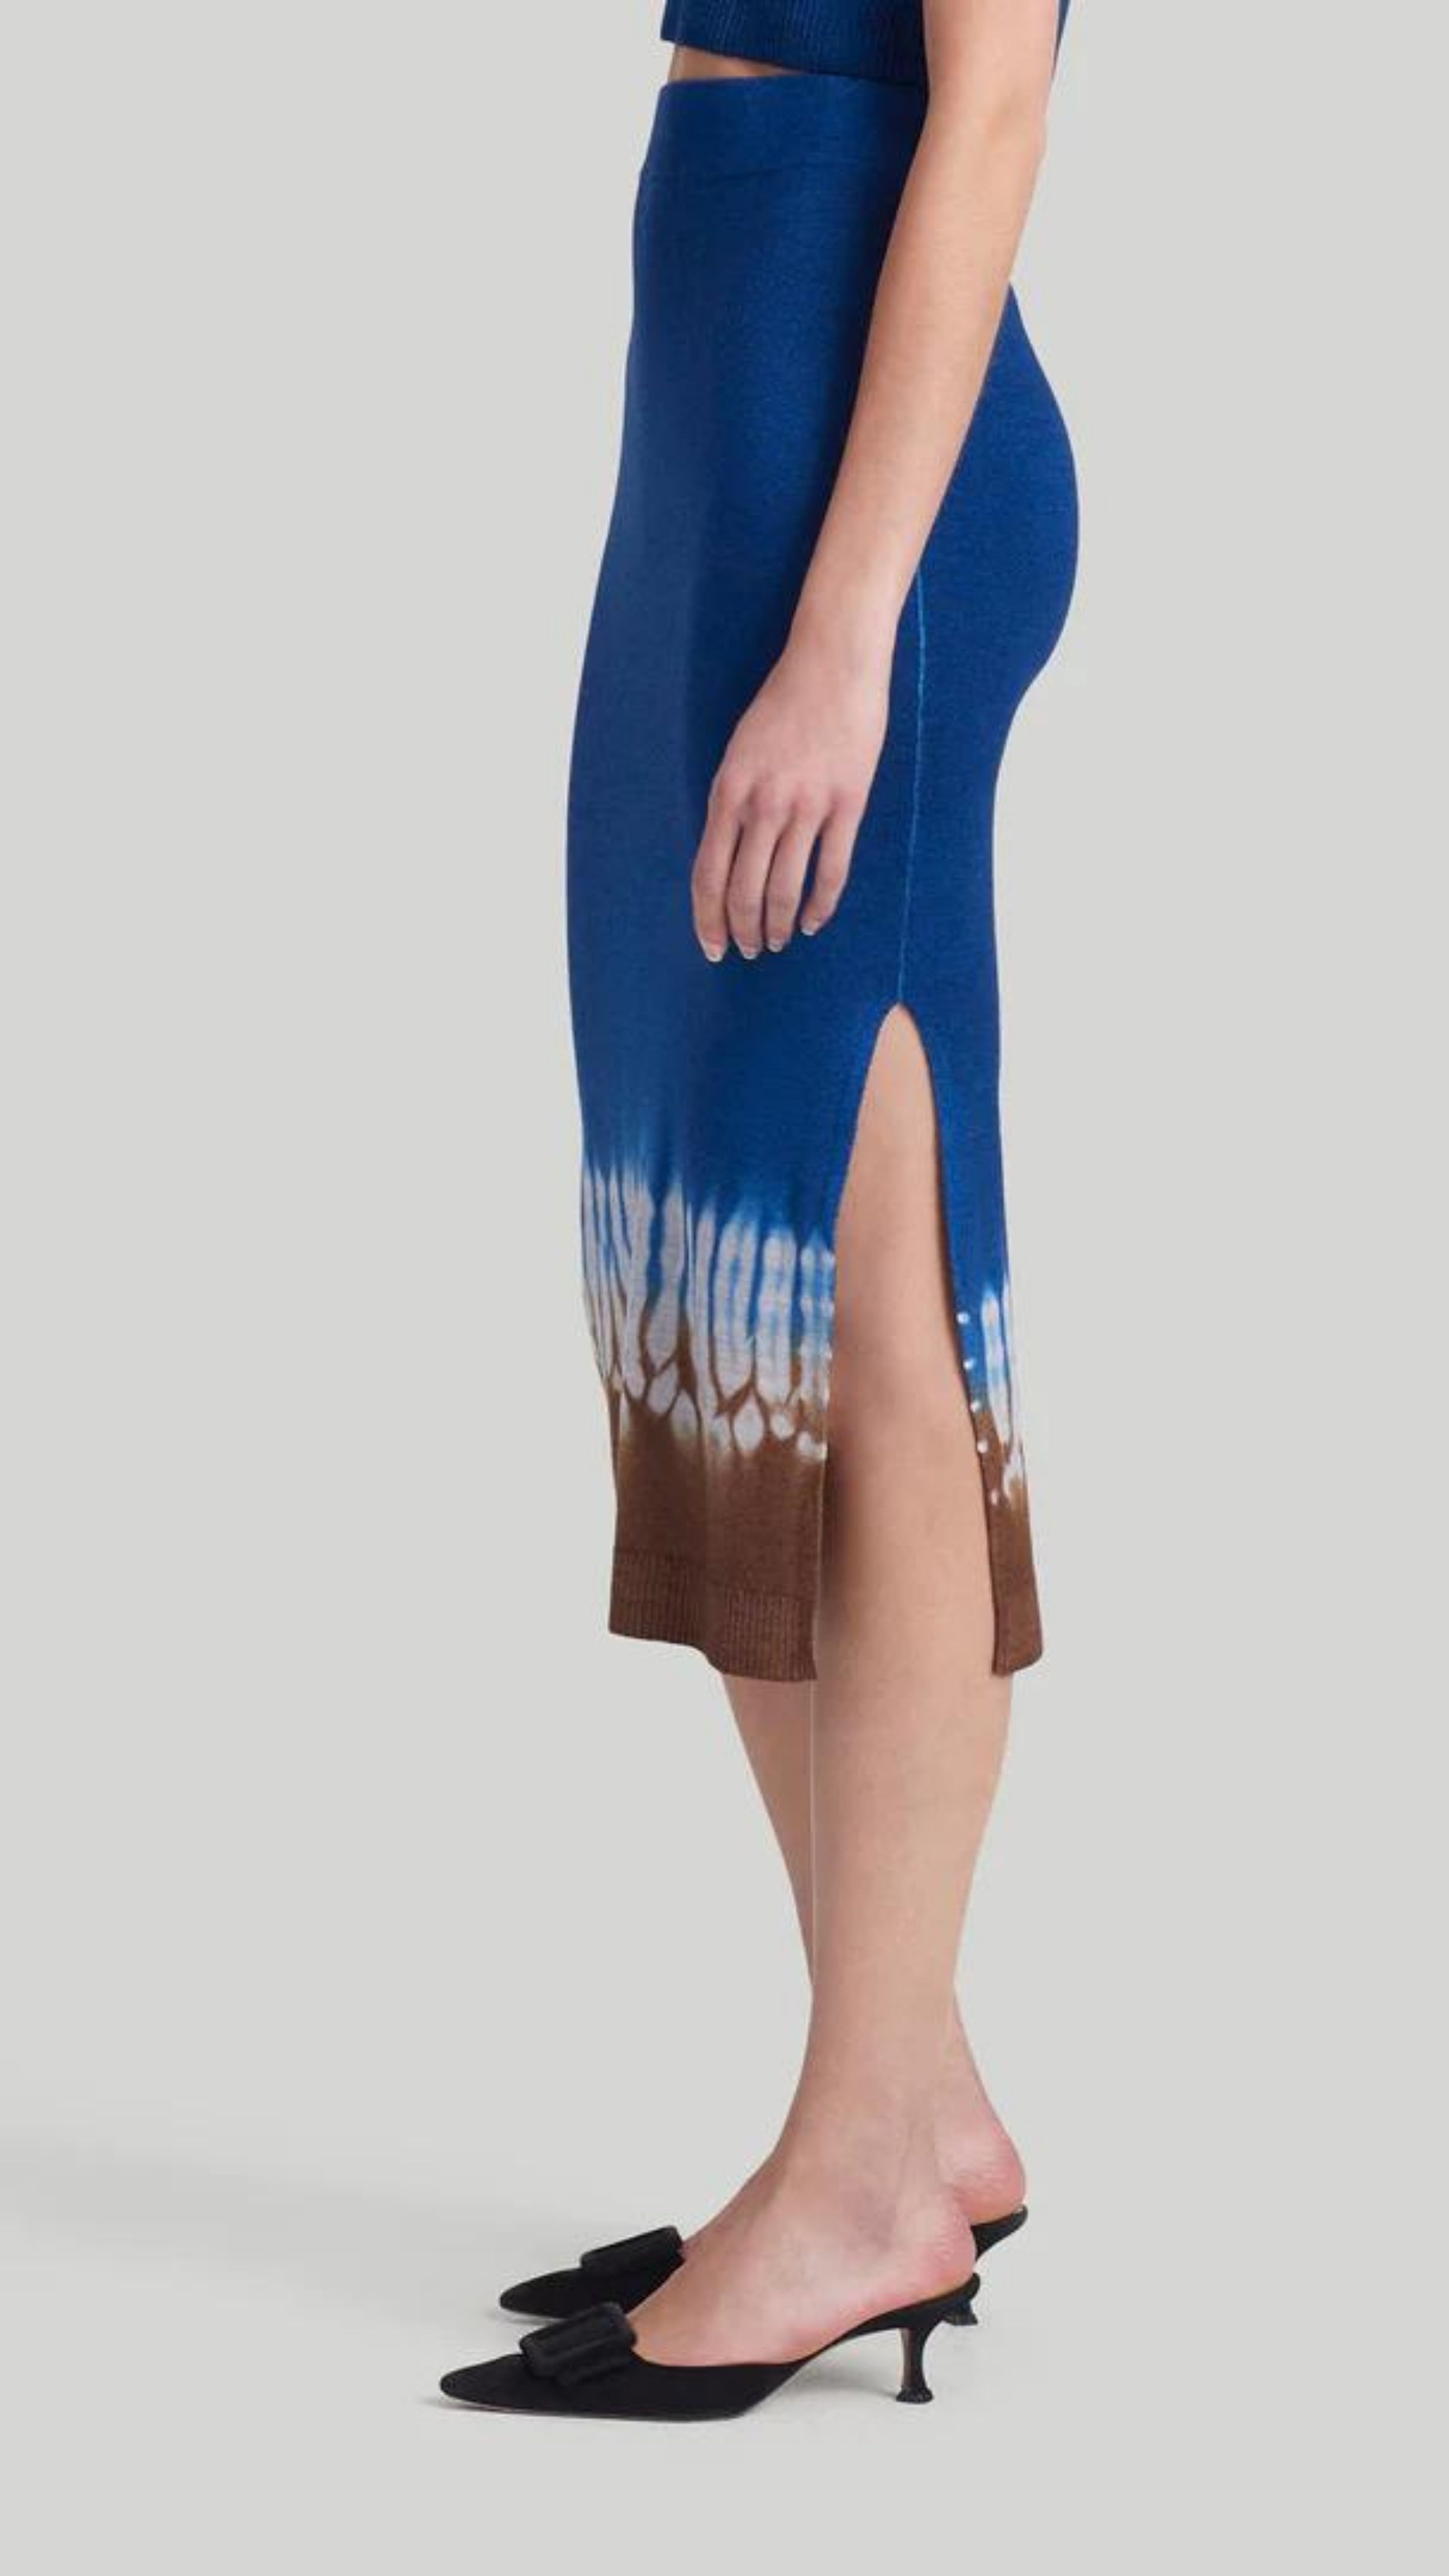 Altuzarra &#39;Morse&#39; skirt, featuring Altuzarra&#39;s iconic Shibori tie-dye technique in brown, white, and blue. Made from 100% Superfine Merino 130&#39;s wool, this high-rise pencil silhouette midi length skirt. Shown on model facing side.